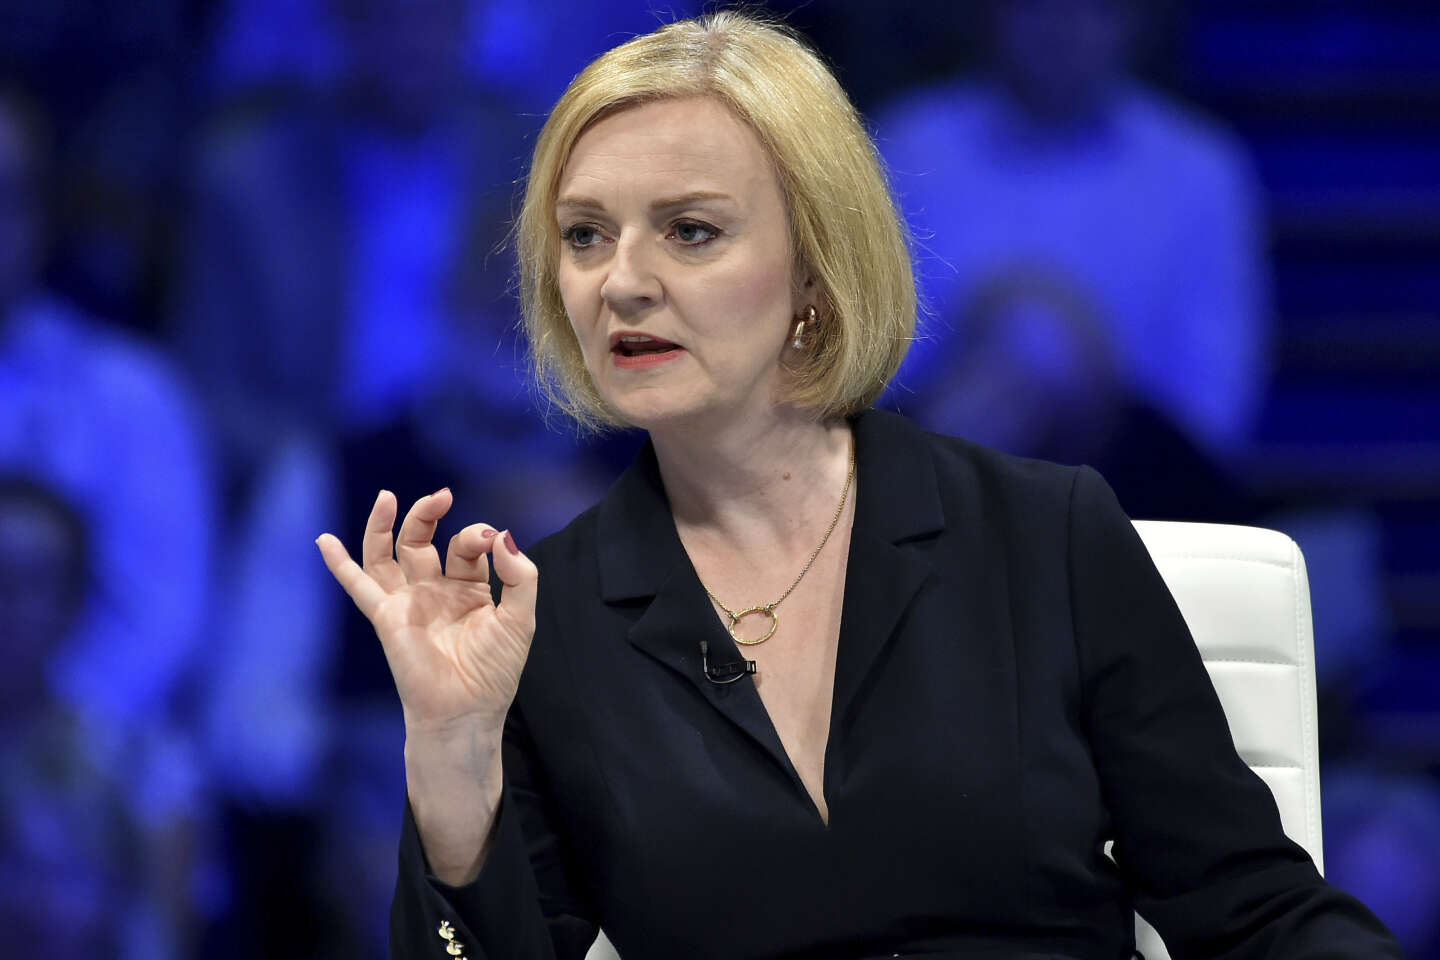 Liz Truss, a staunch Liberal, future Prime Minister of the United Kingdom